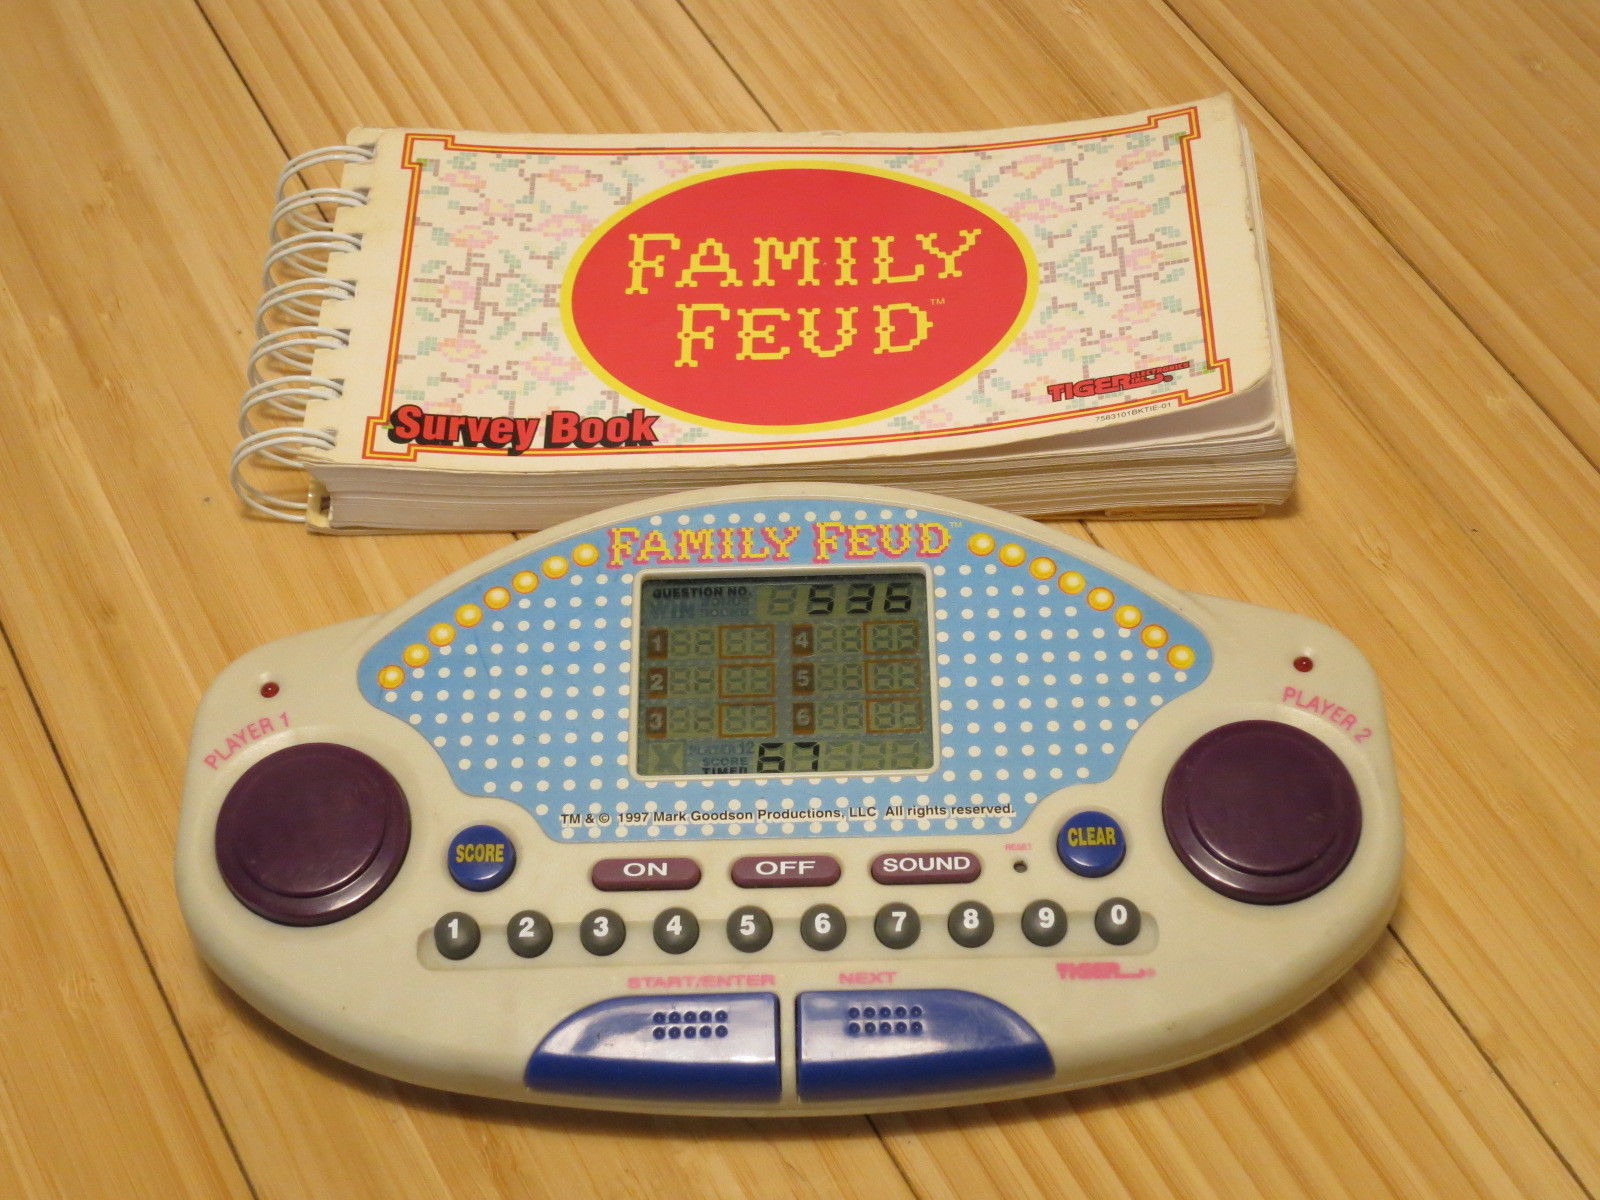 Jeopardy Tiger Electronic Handheld Game Cartridge and Book 3 Vintage1995 for sale online 